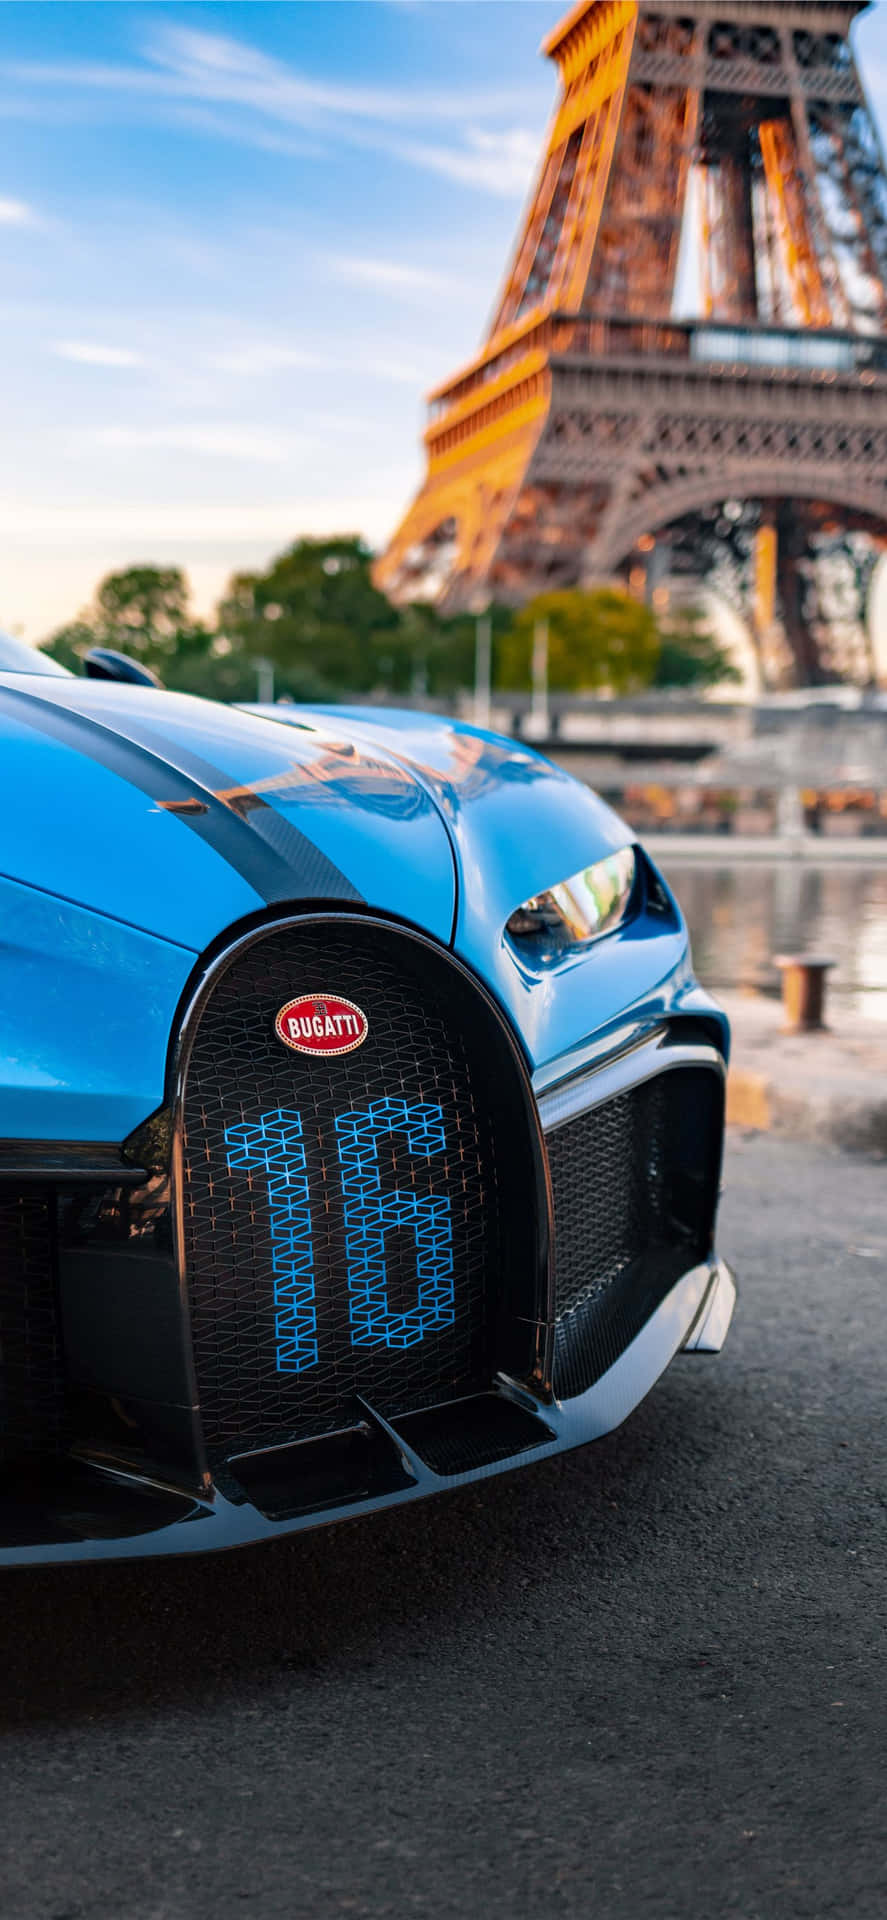 Bugatti Veyron: Luxury Performance in Your Hands Wallpaper